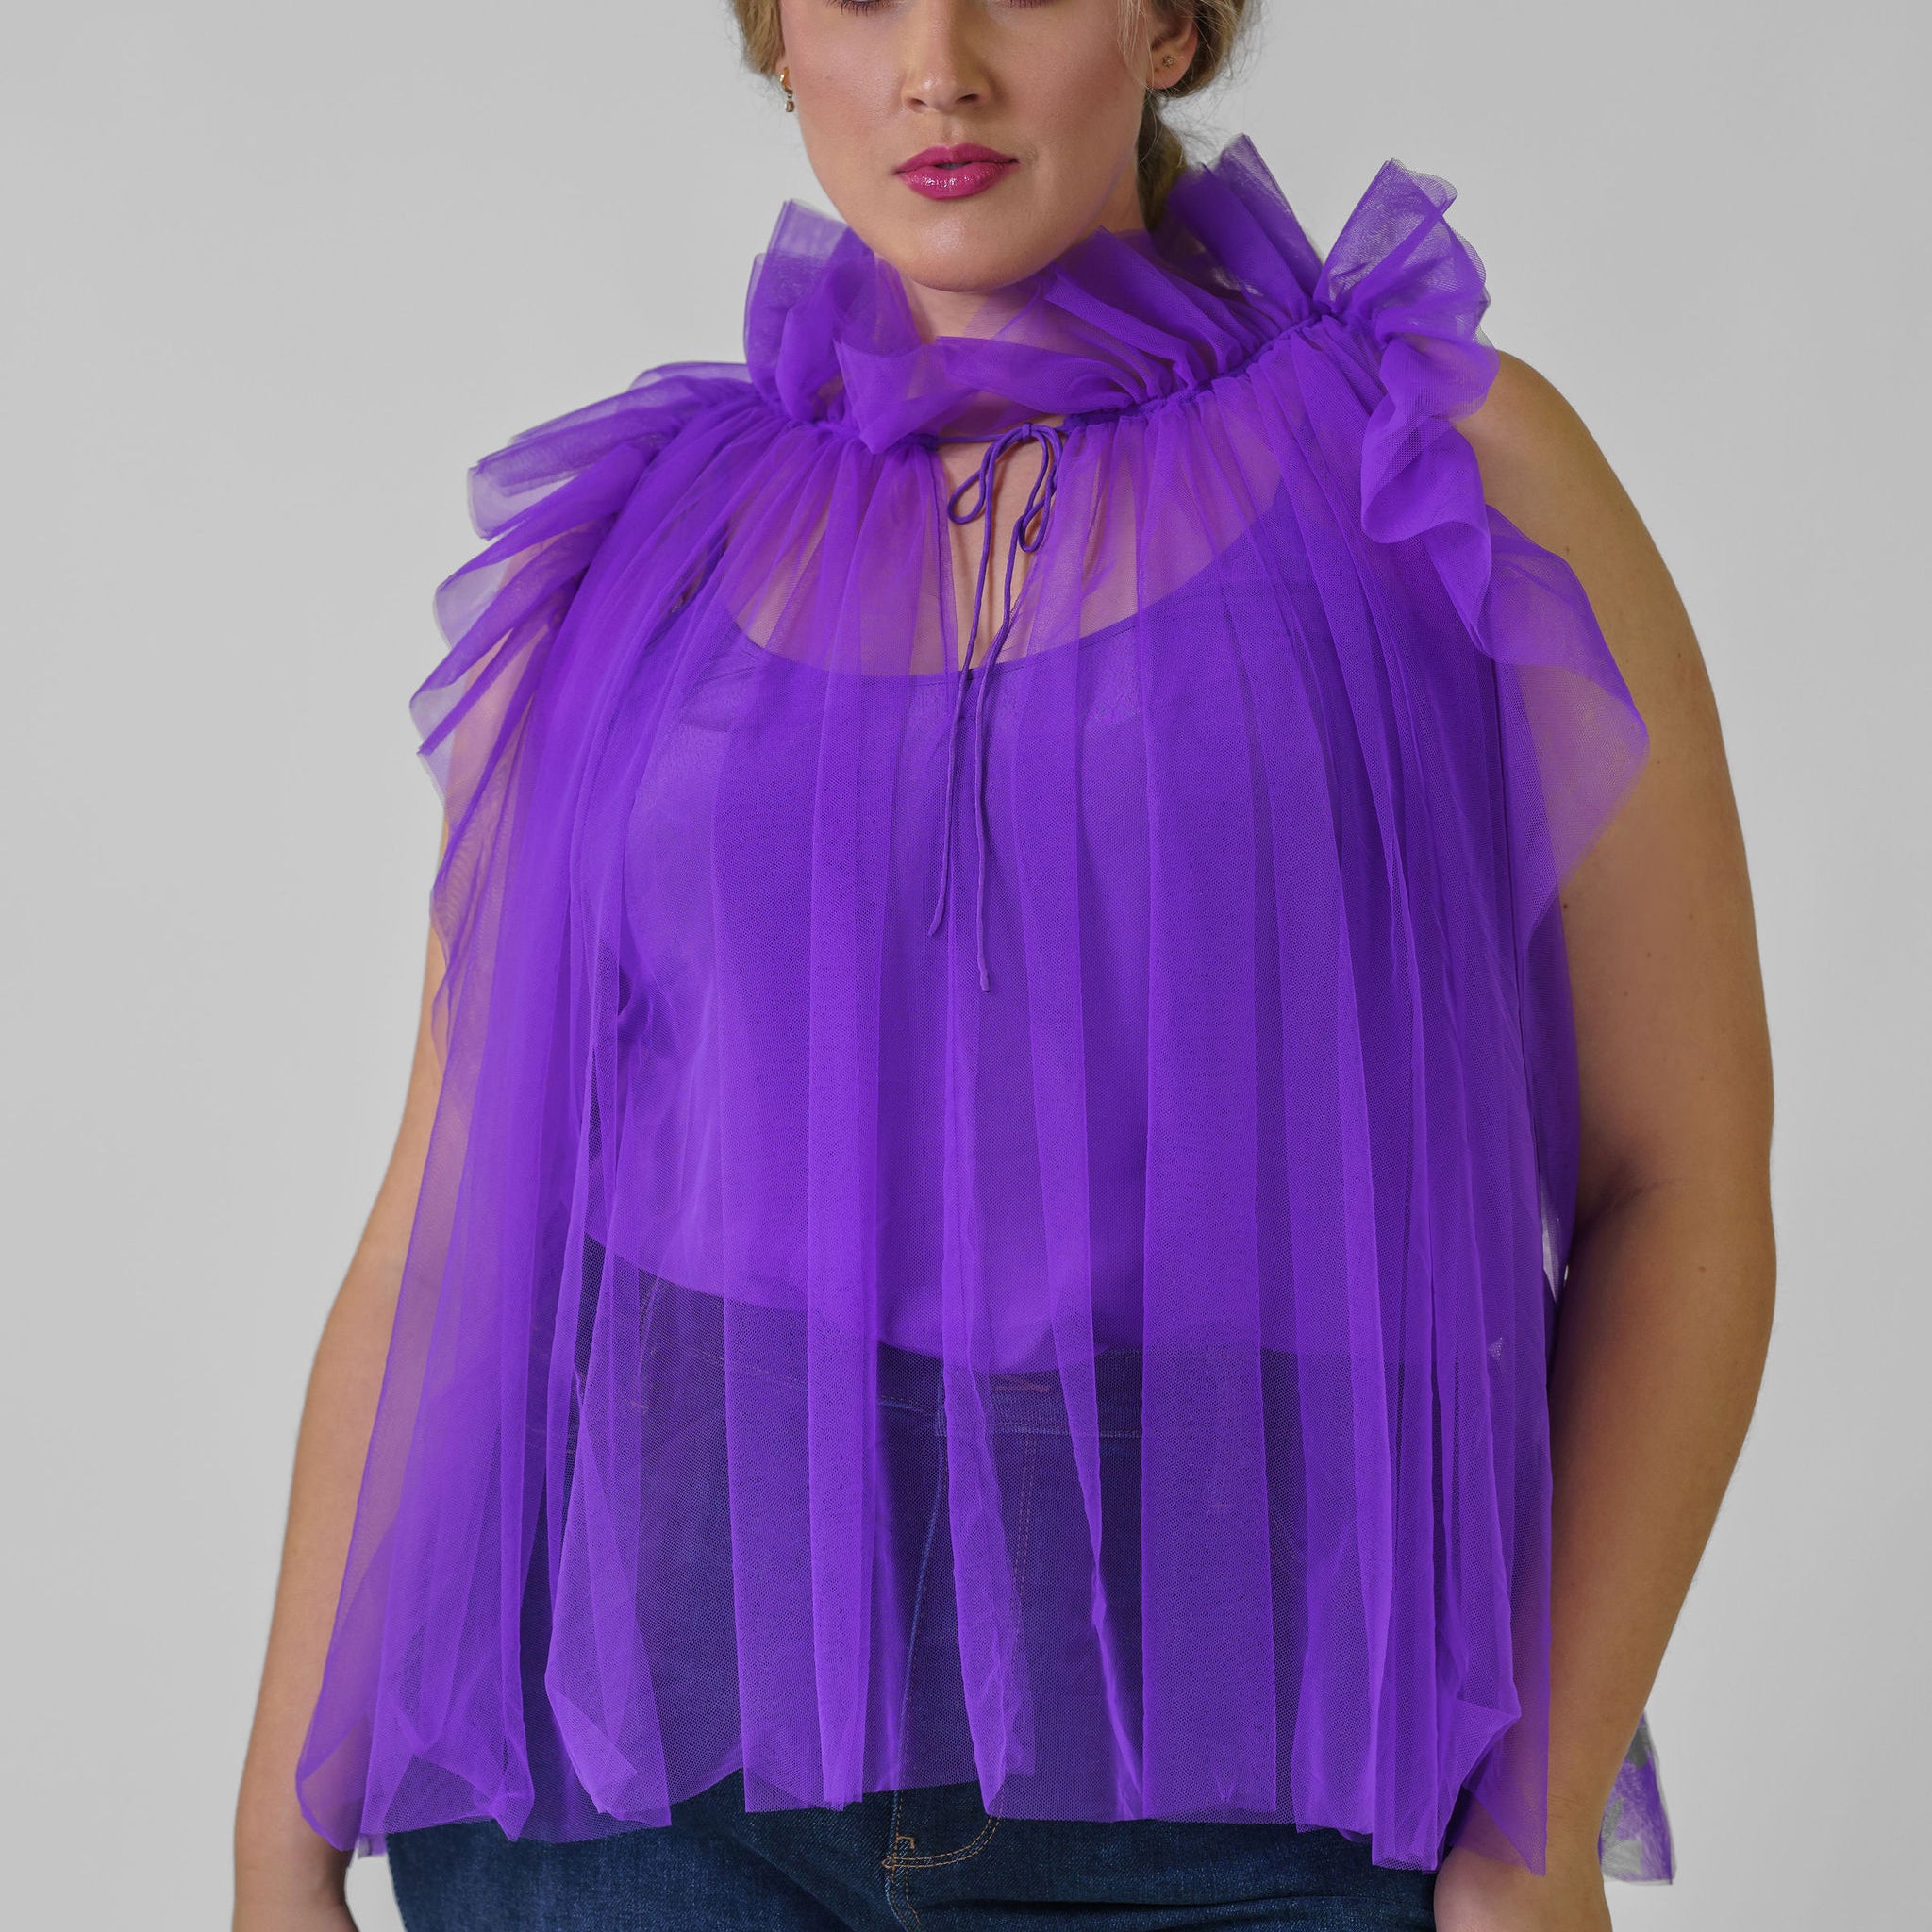 TULLE TOP WITH RUFFLES - AMOUR781